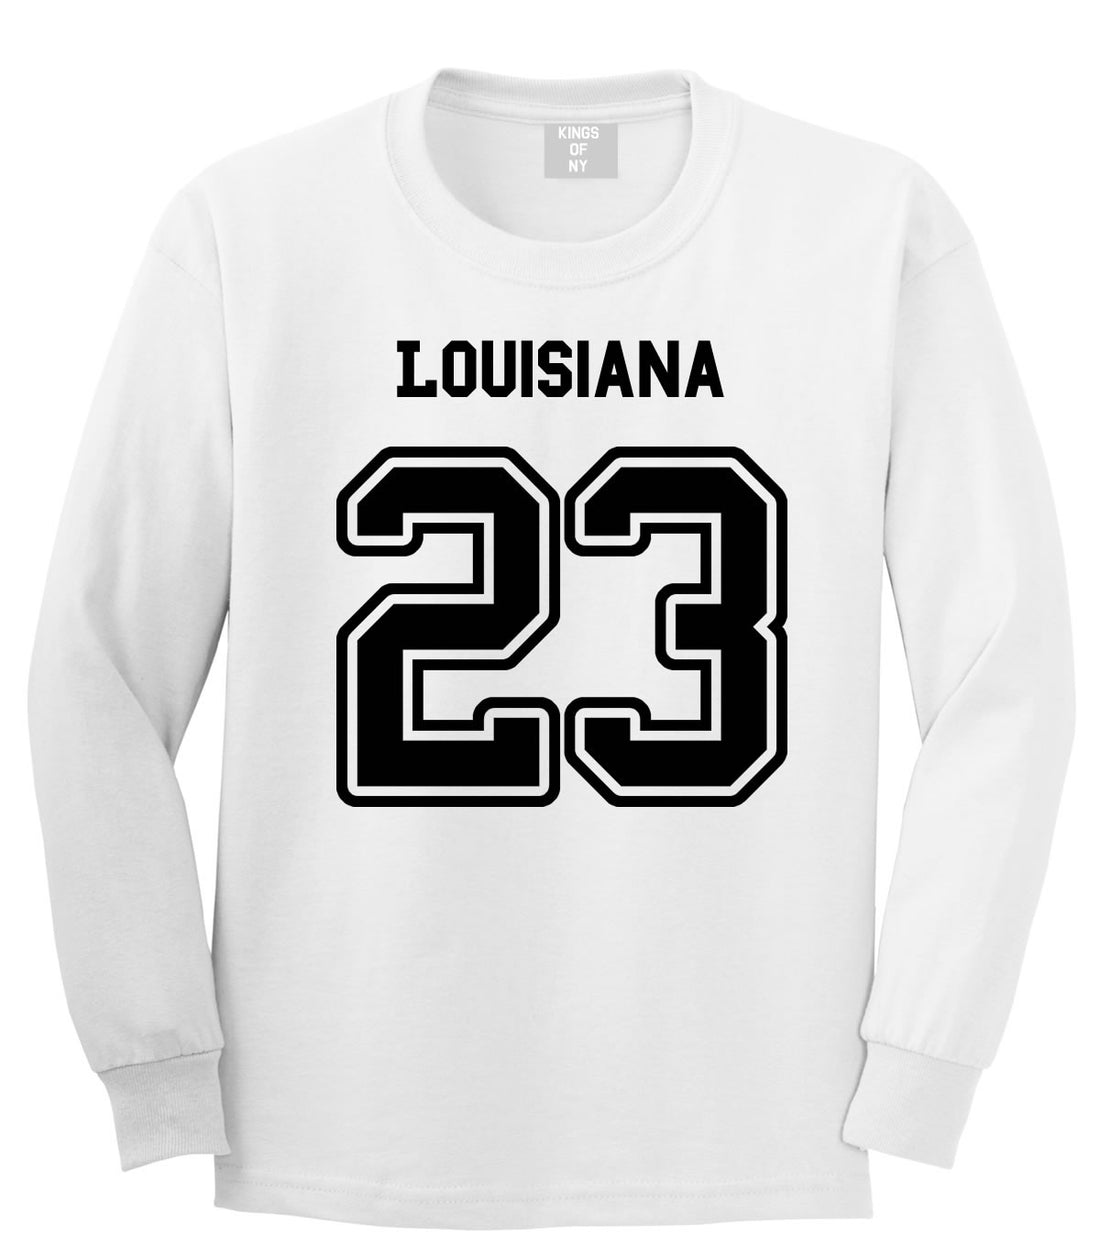 Sport Style Louisiana 23 Team State Jersey Long Sleeve T-Shirt By Kings Of NY